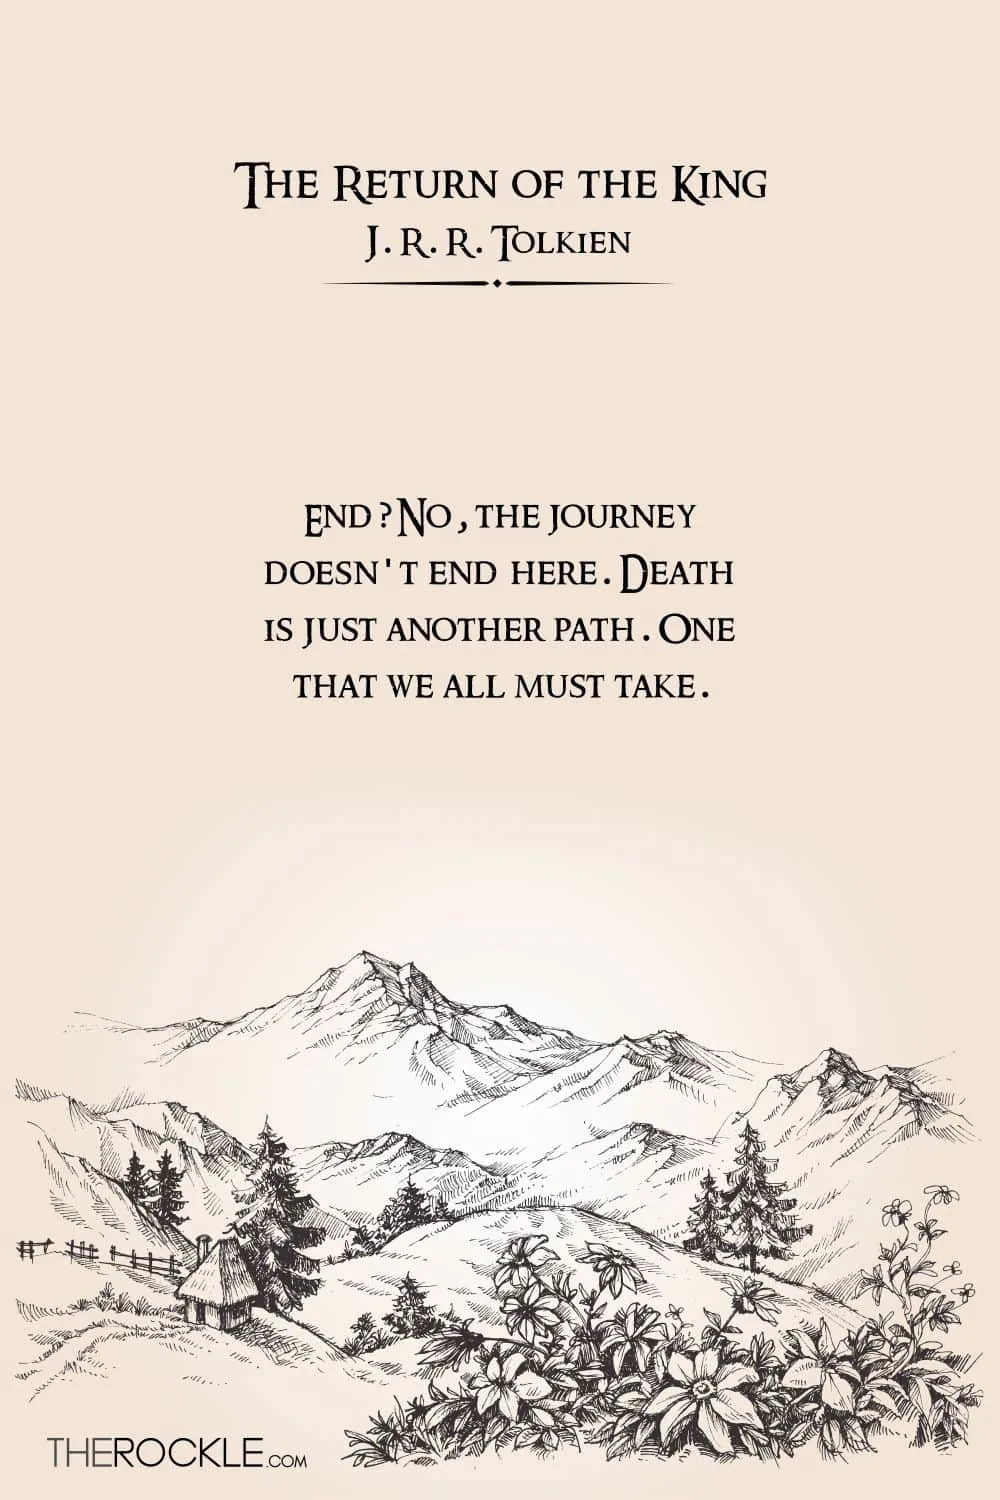 Tolkien on how death is not the end